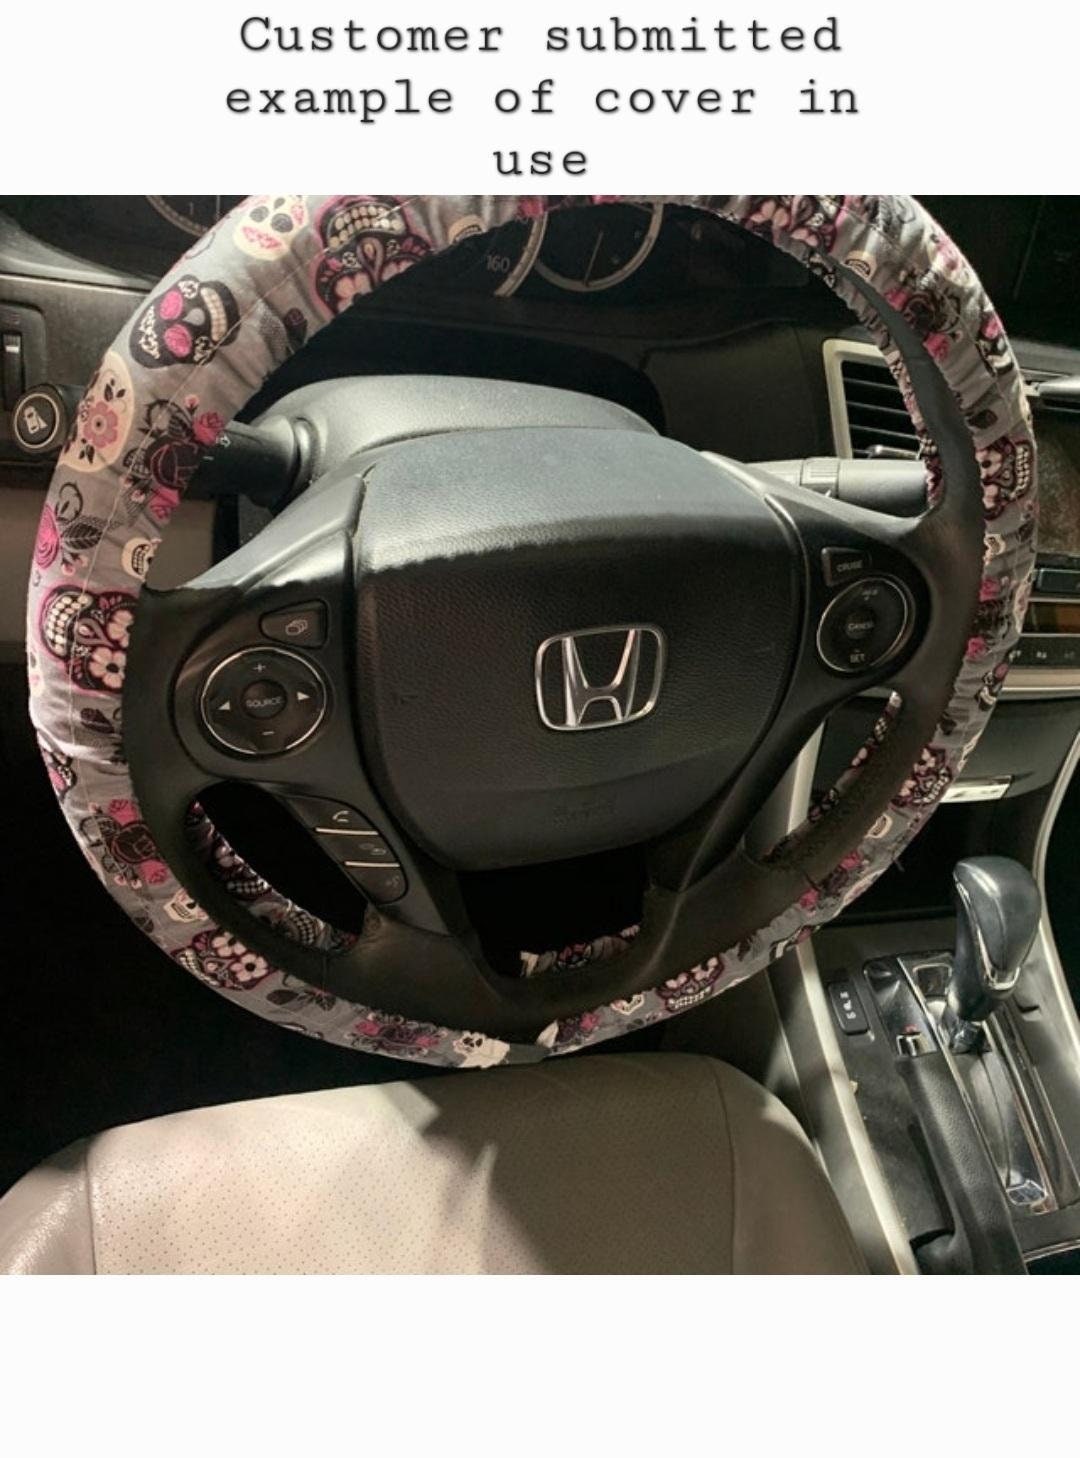 Floral Grey Steering Wheel Cover, 100% Cotton, Washable, Custom Car Accessories, Gift for Her - Harlow's Store and Garden Gifts